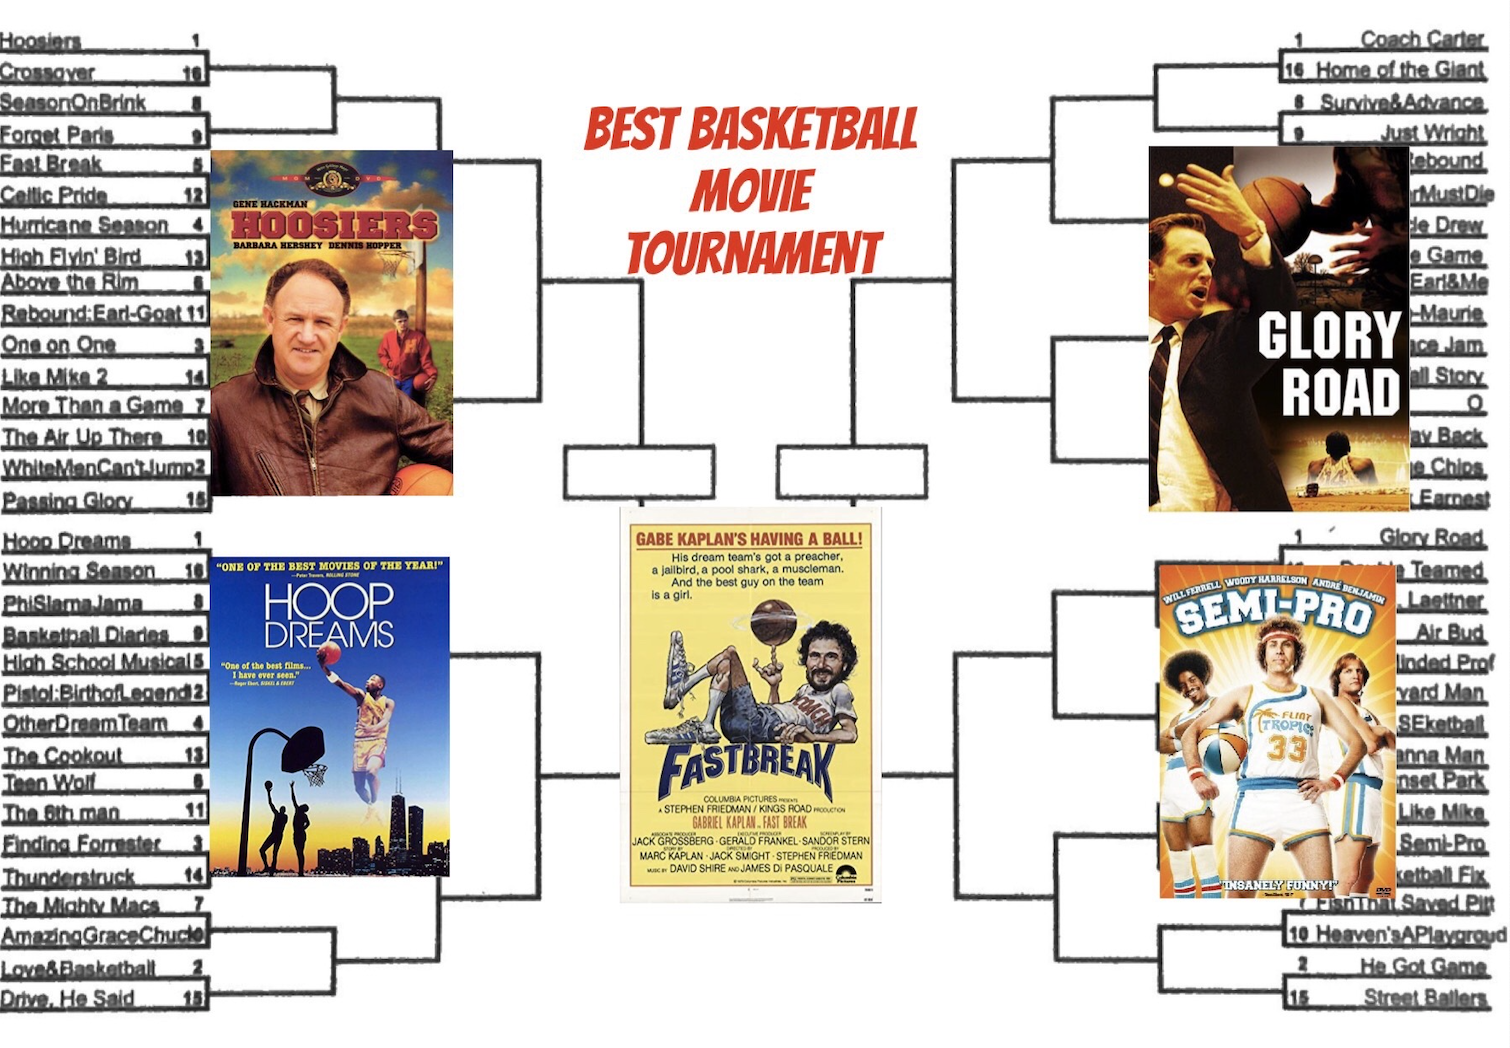 Finding The Final Four of Hollywood Hoops